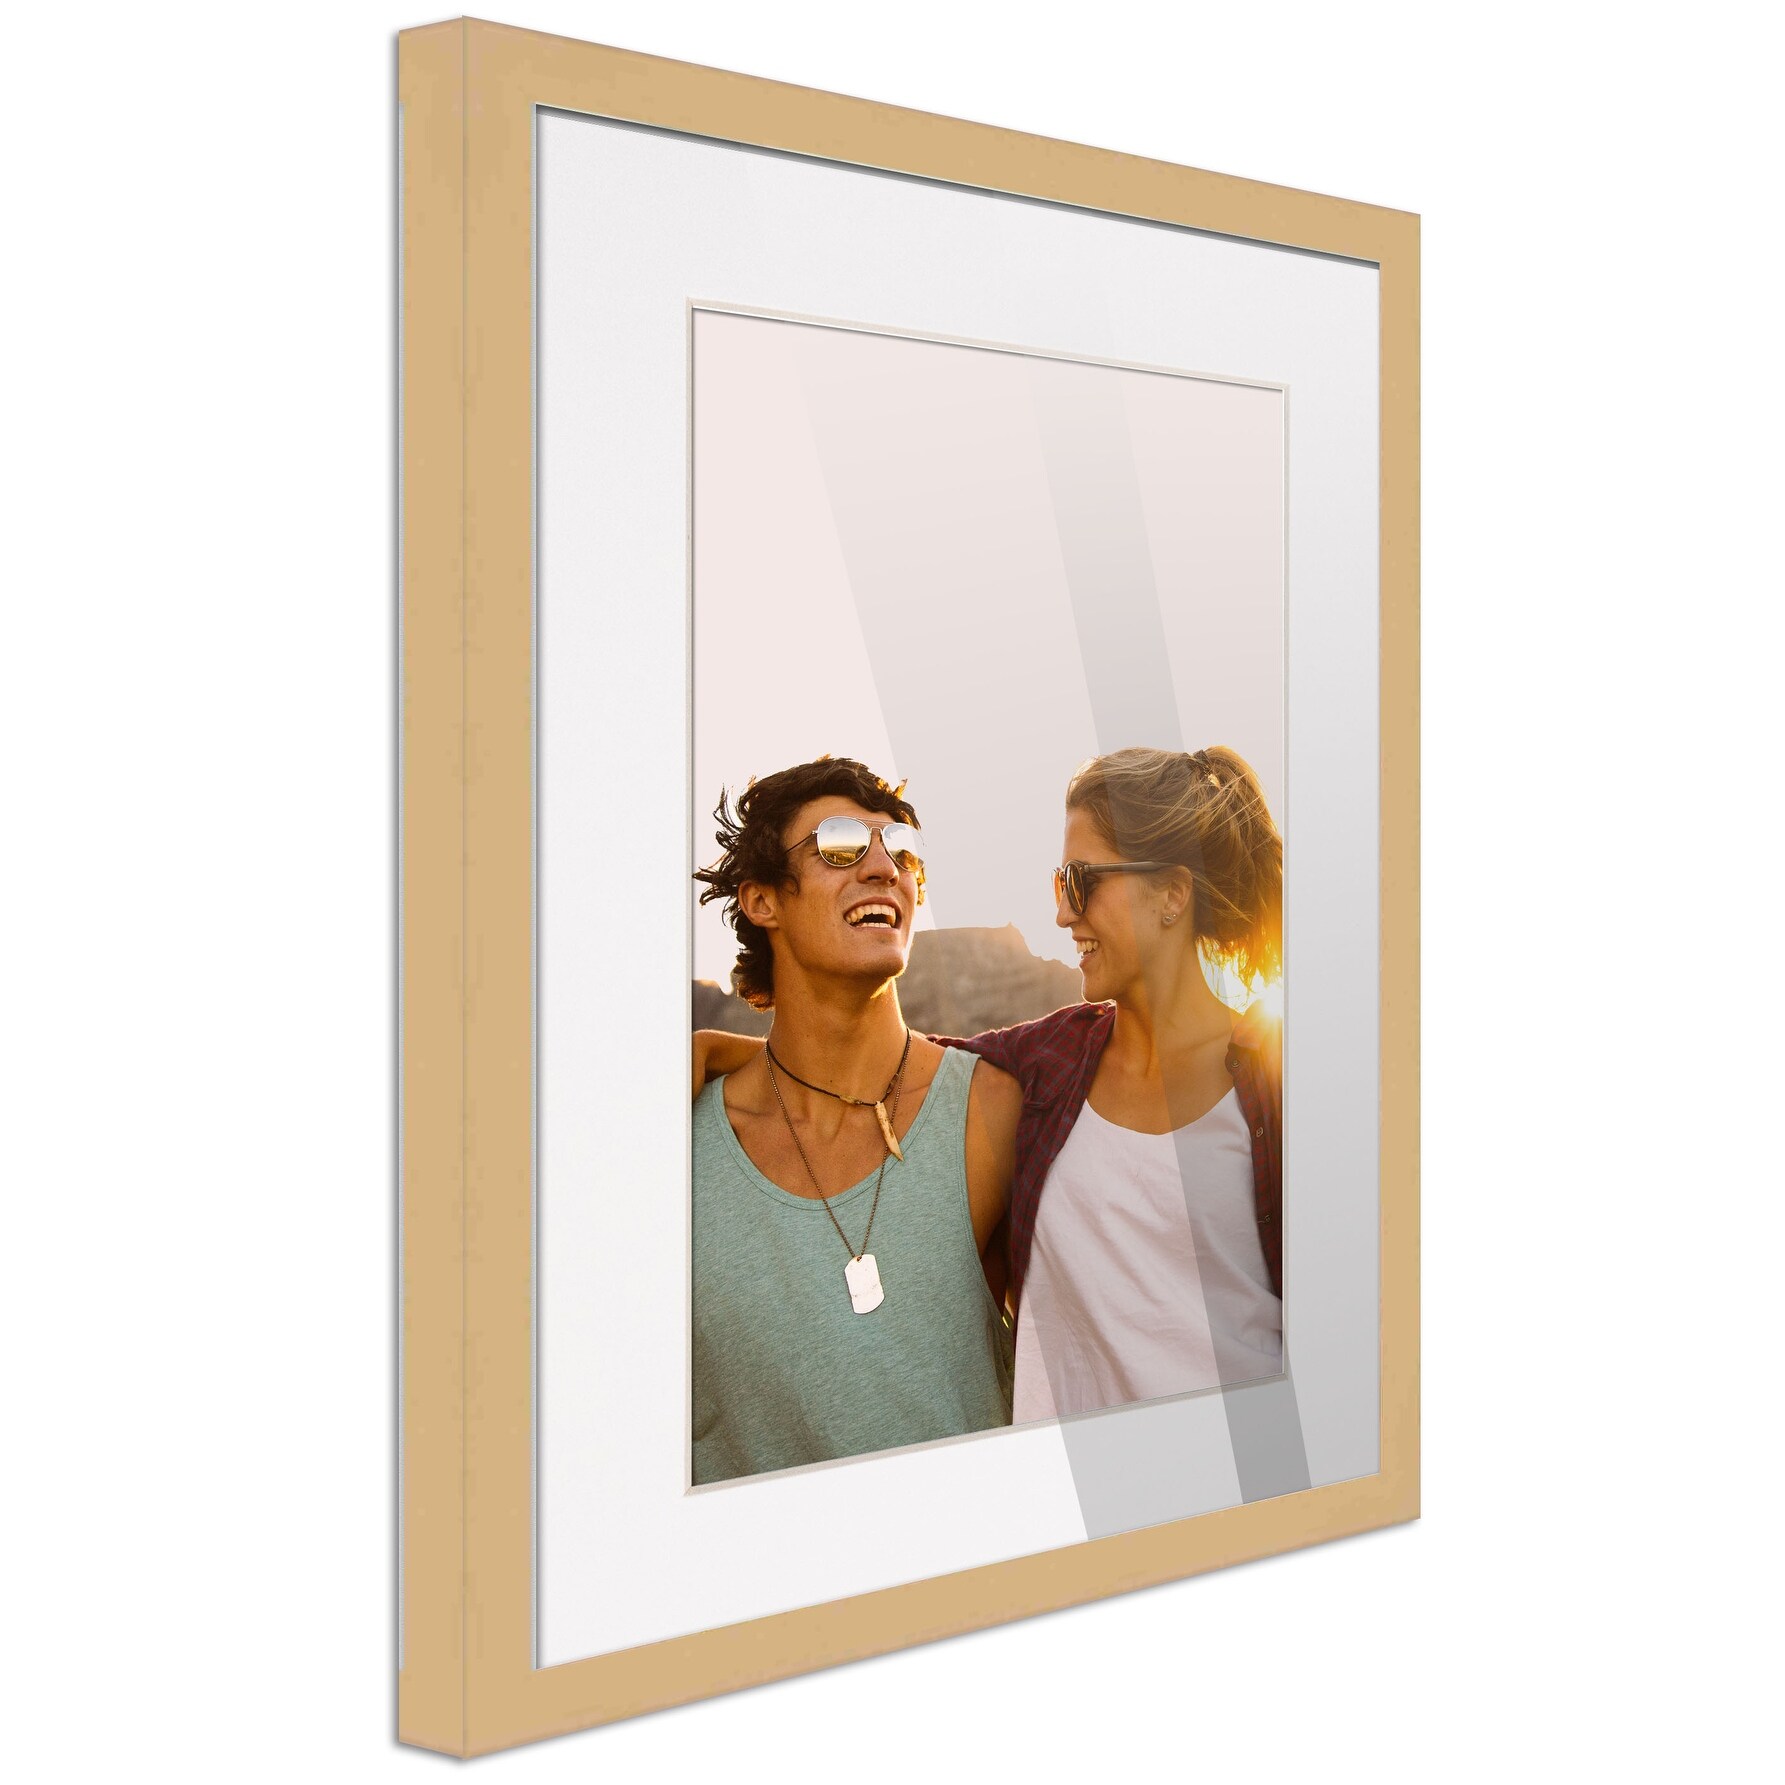 https://ak1.ostkcdn.com/images/products/is/images/direct/0db36d502e7411650f1551f44bf759f34c60486c/14x17-Natural-Picture-Frame-with-11.5x14.5-White-Mat-Opening-for-12x15.jpg